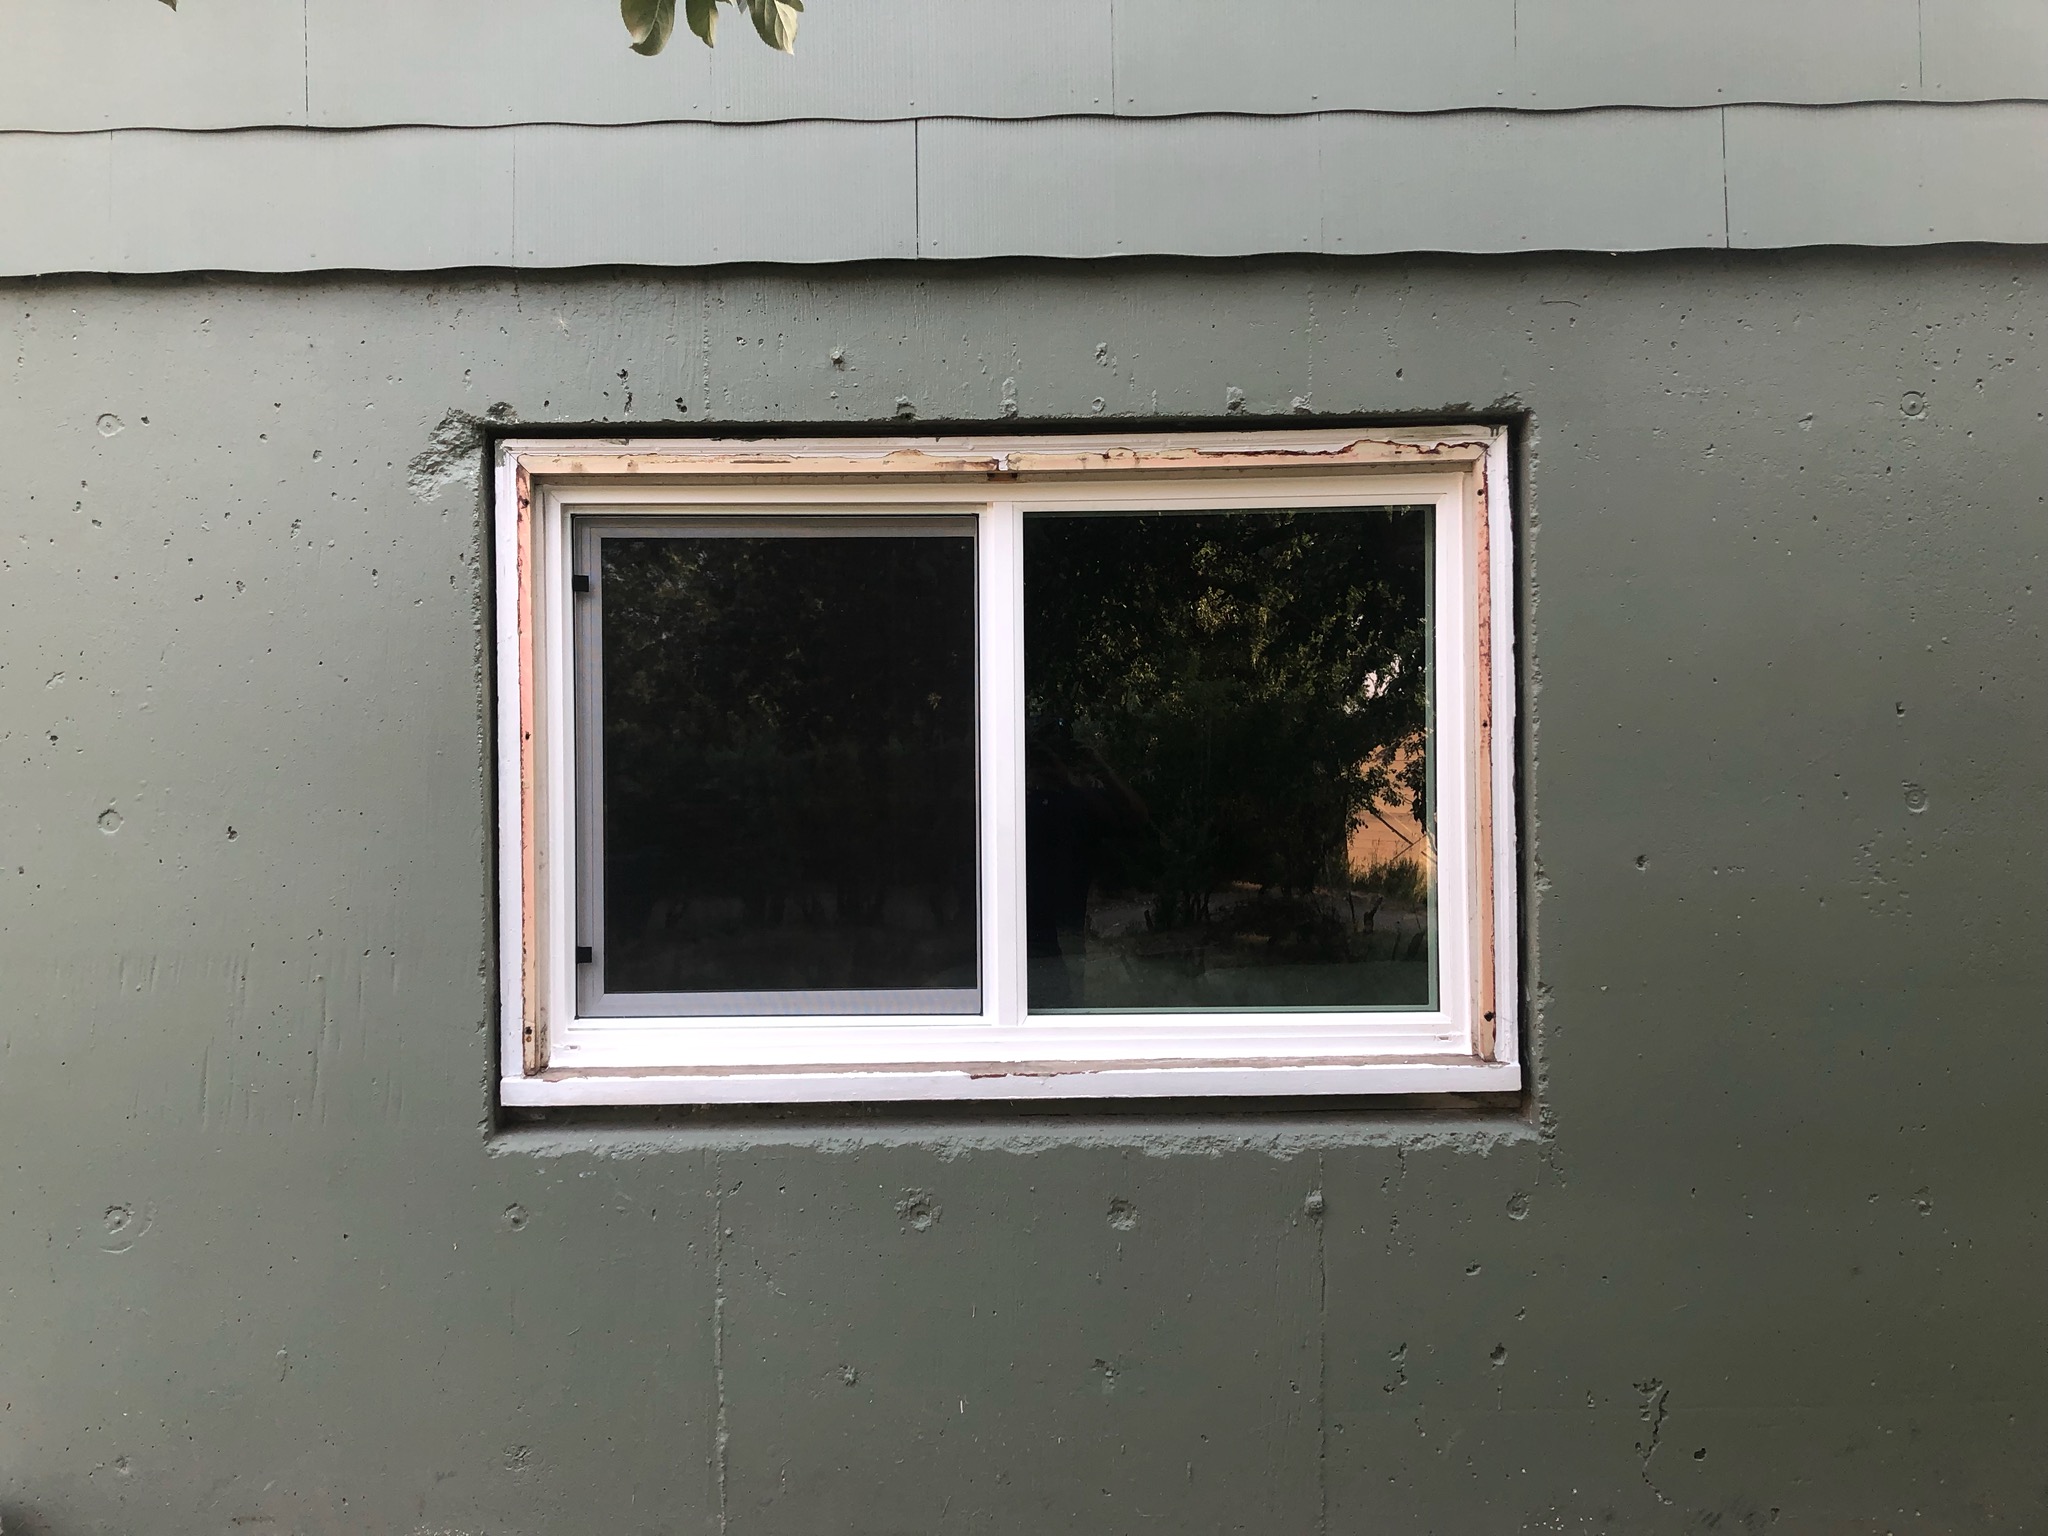 Windows before and after